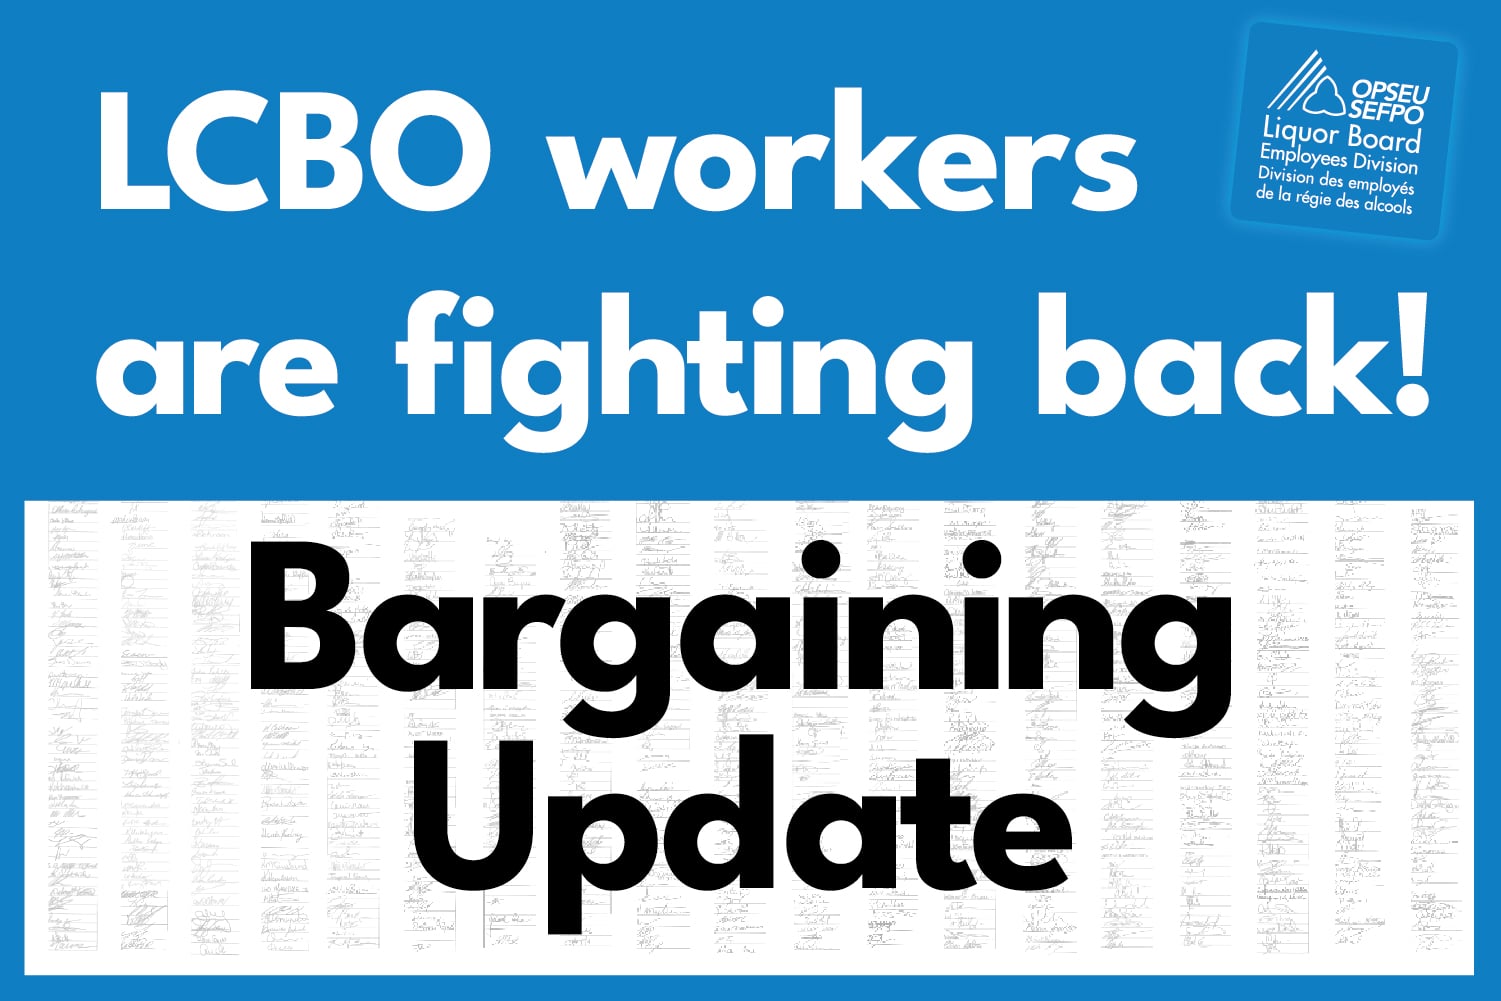 LCBO workers are fighting back! Bargaining Update